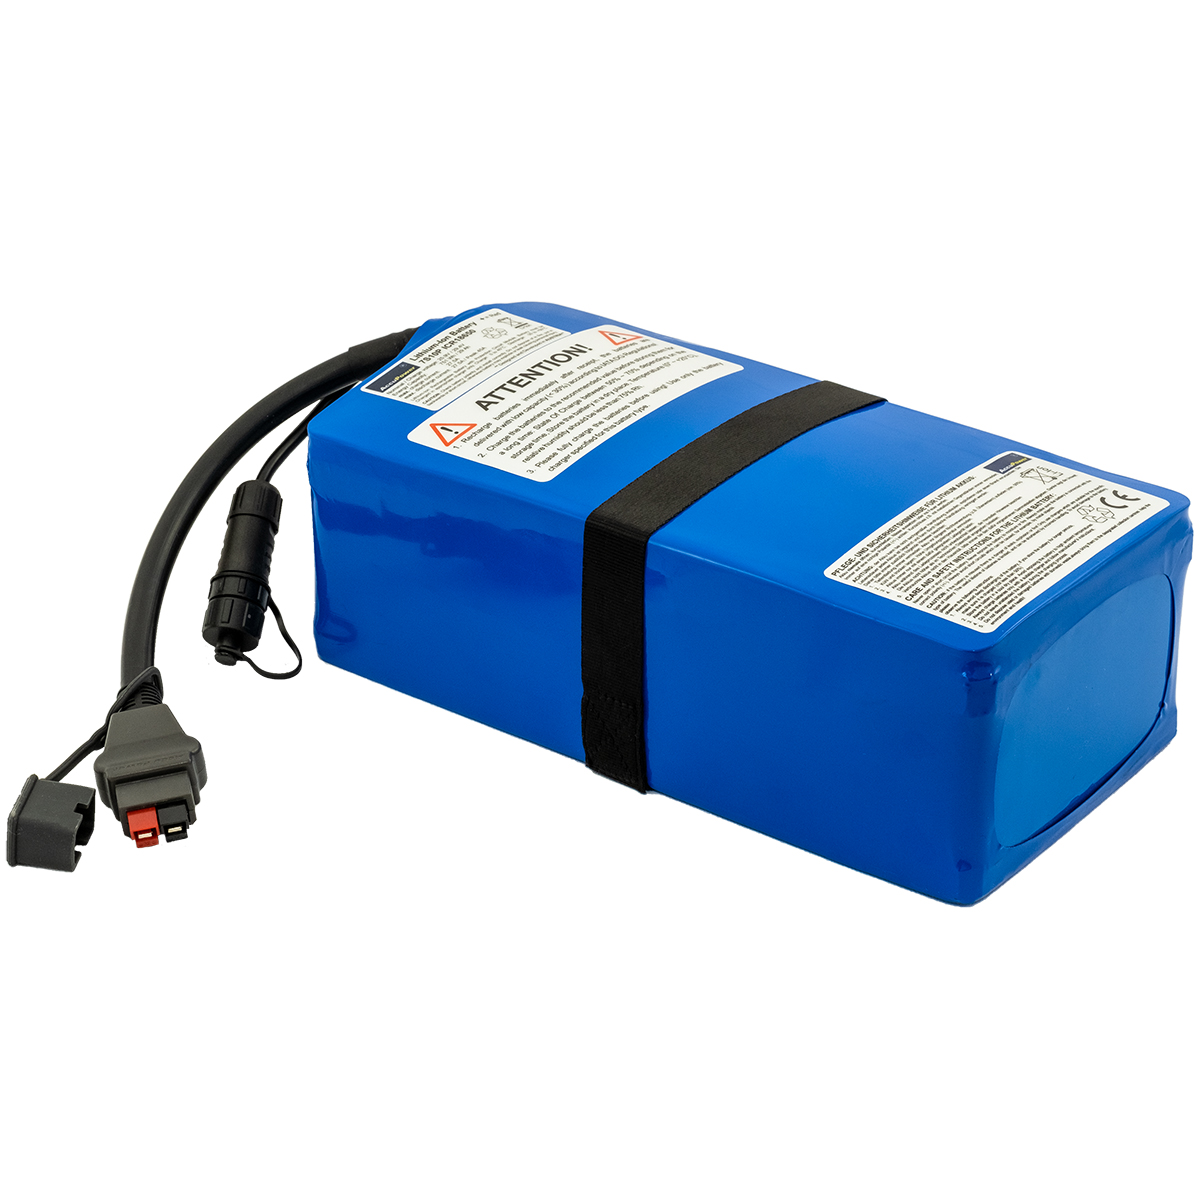 AccuPower Lithium battery 7S10P 25,9V 29Ah 751Wh with interface